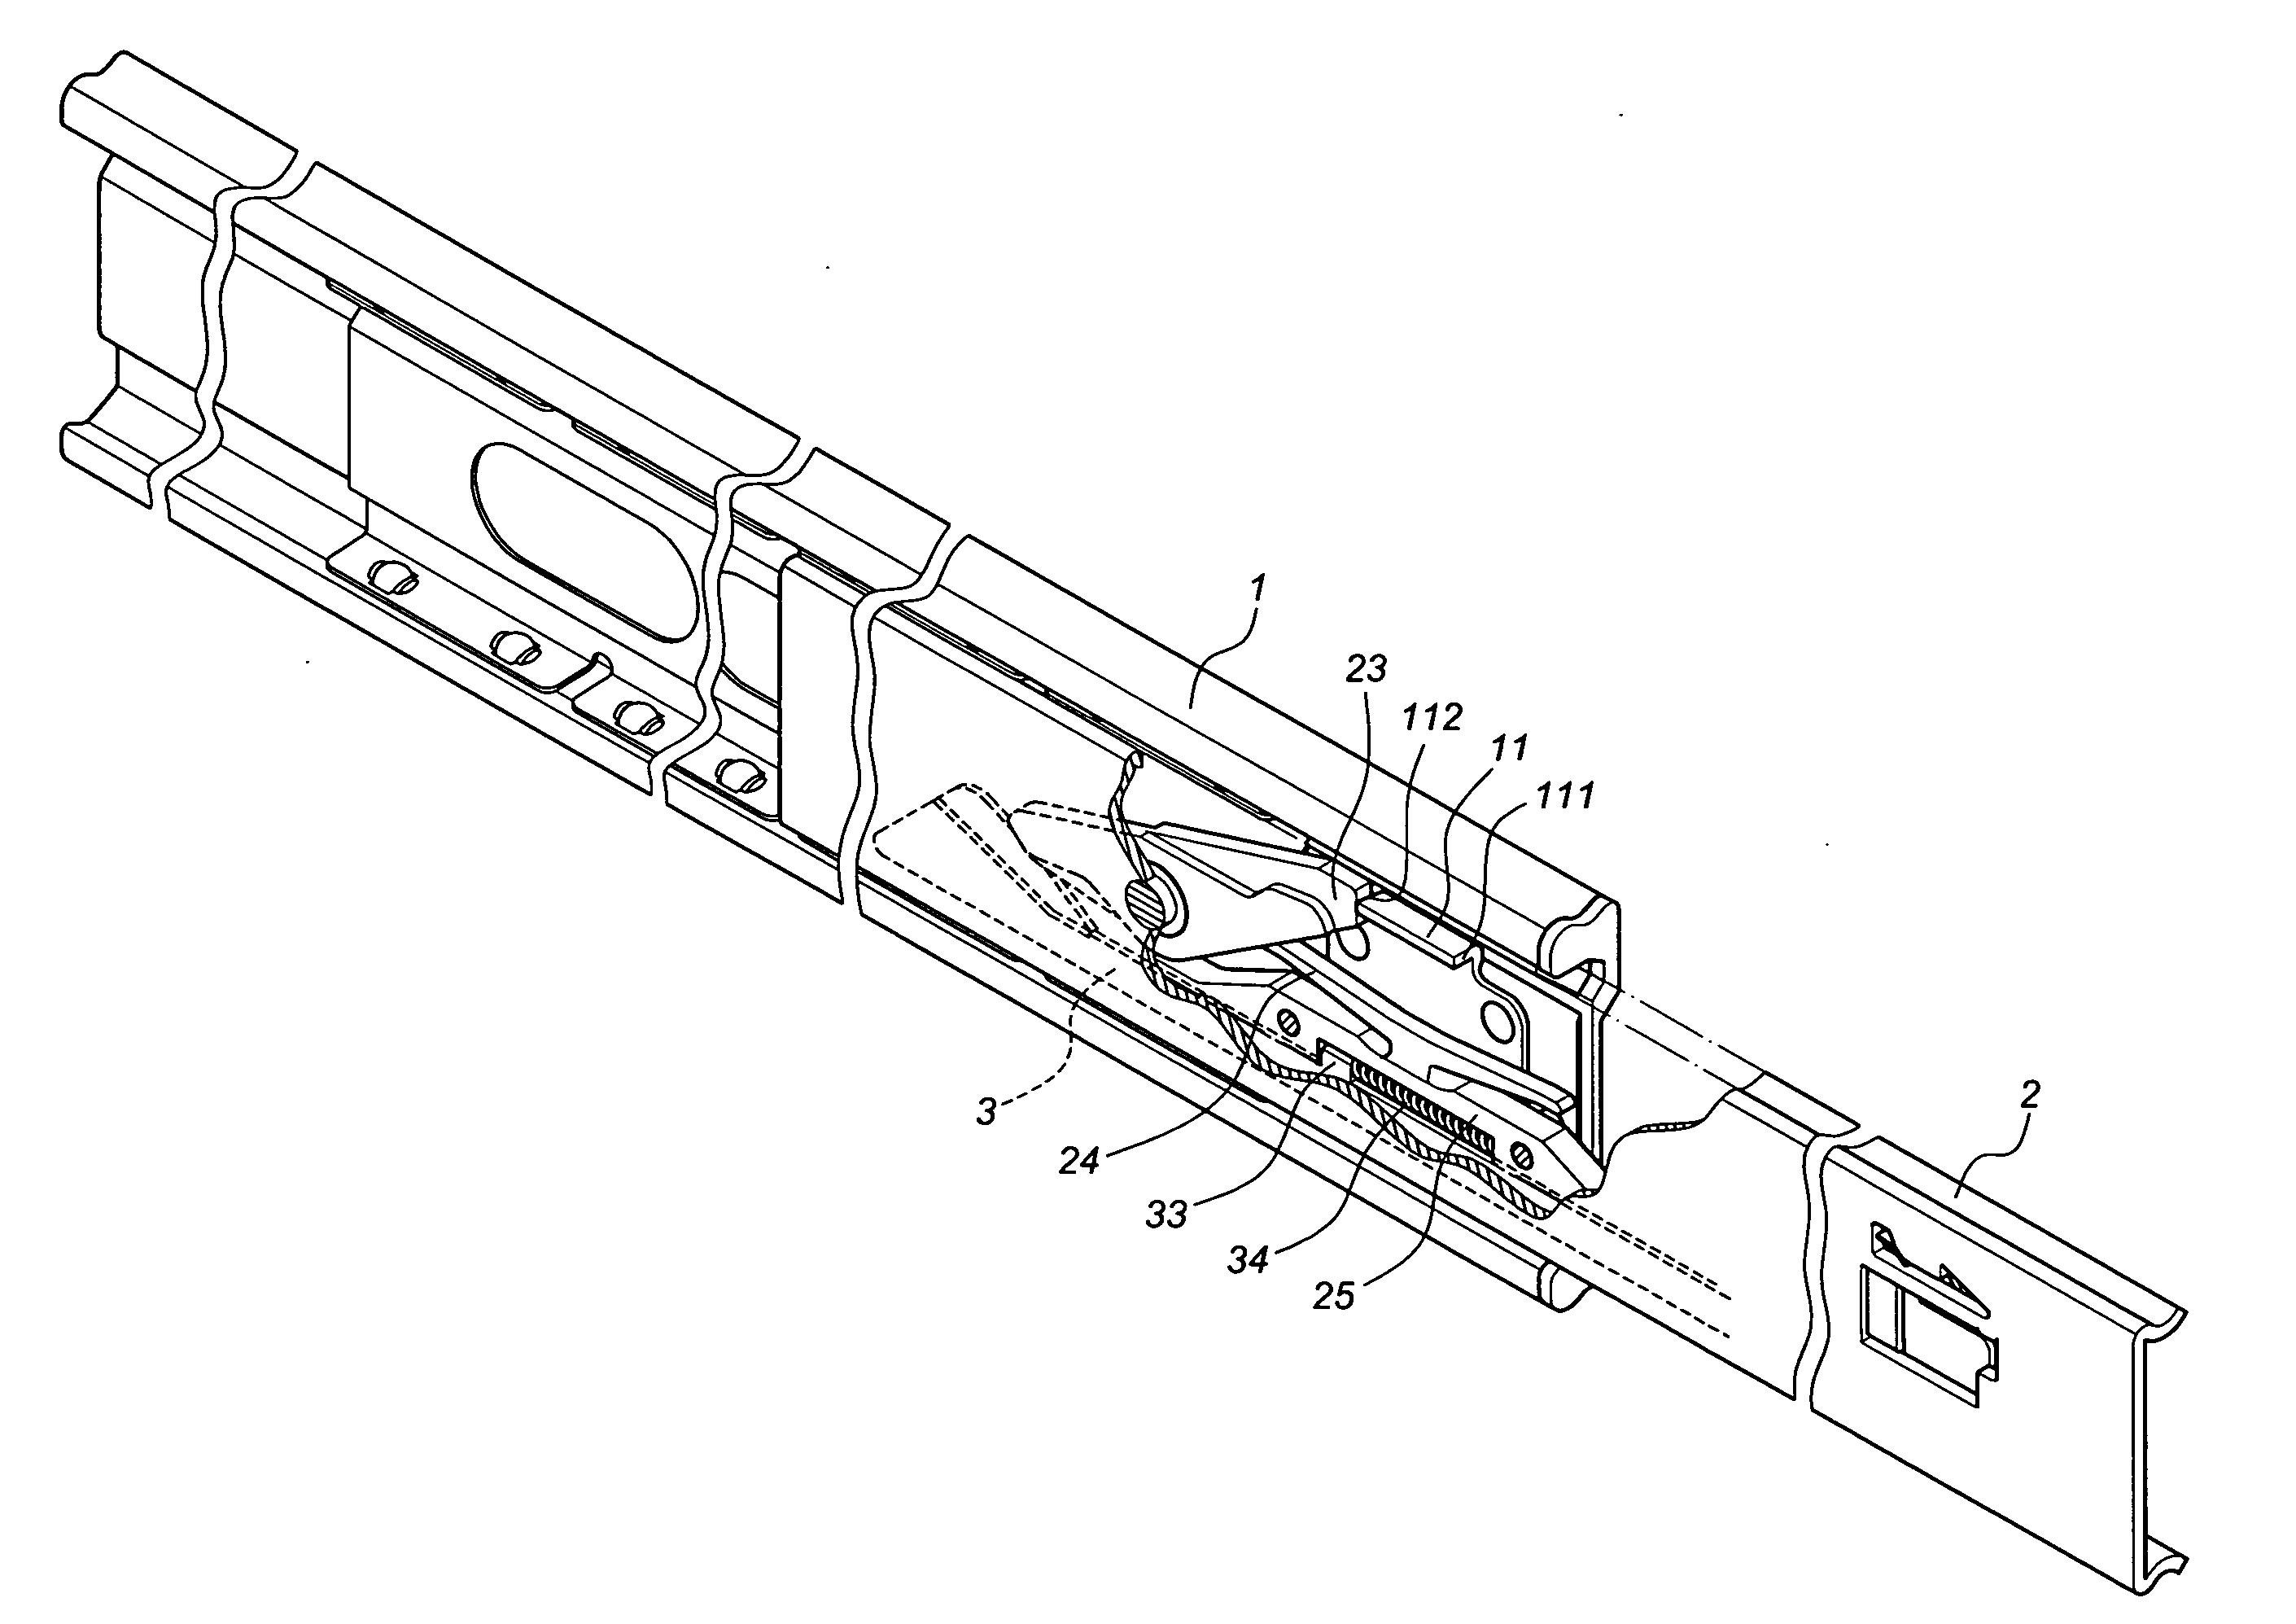 Locating structure for a slide assembly